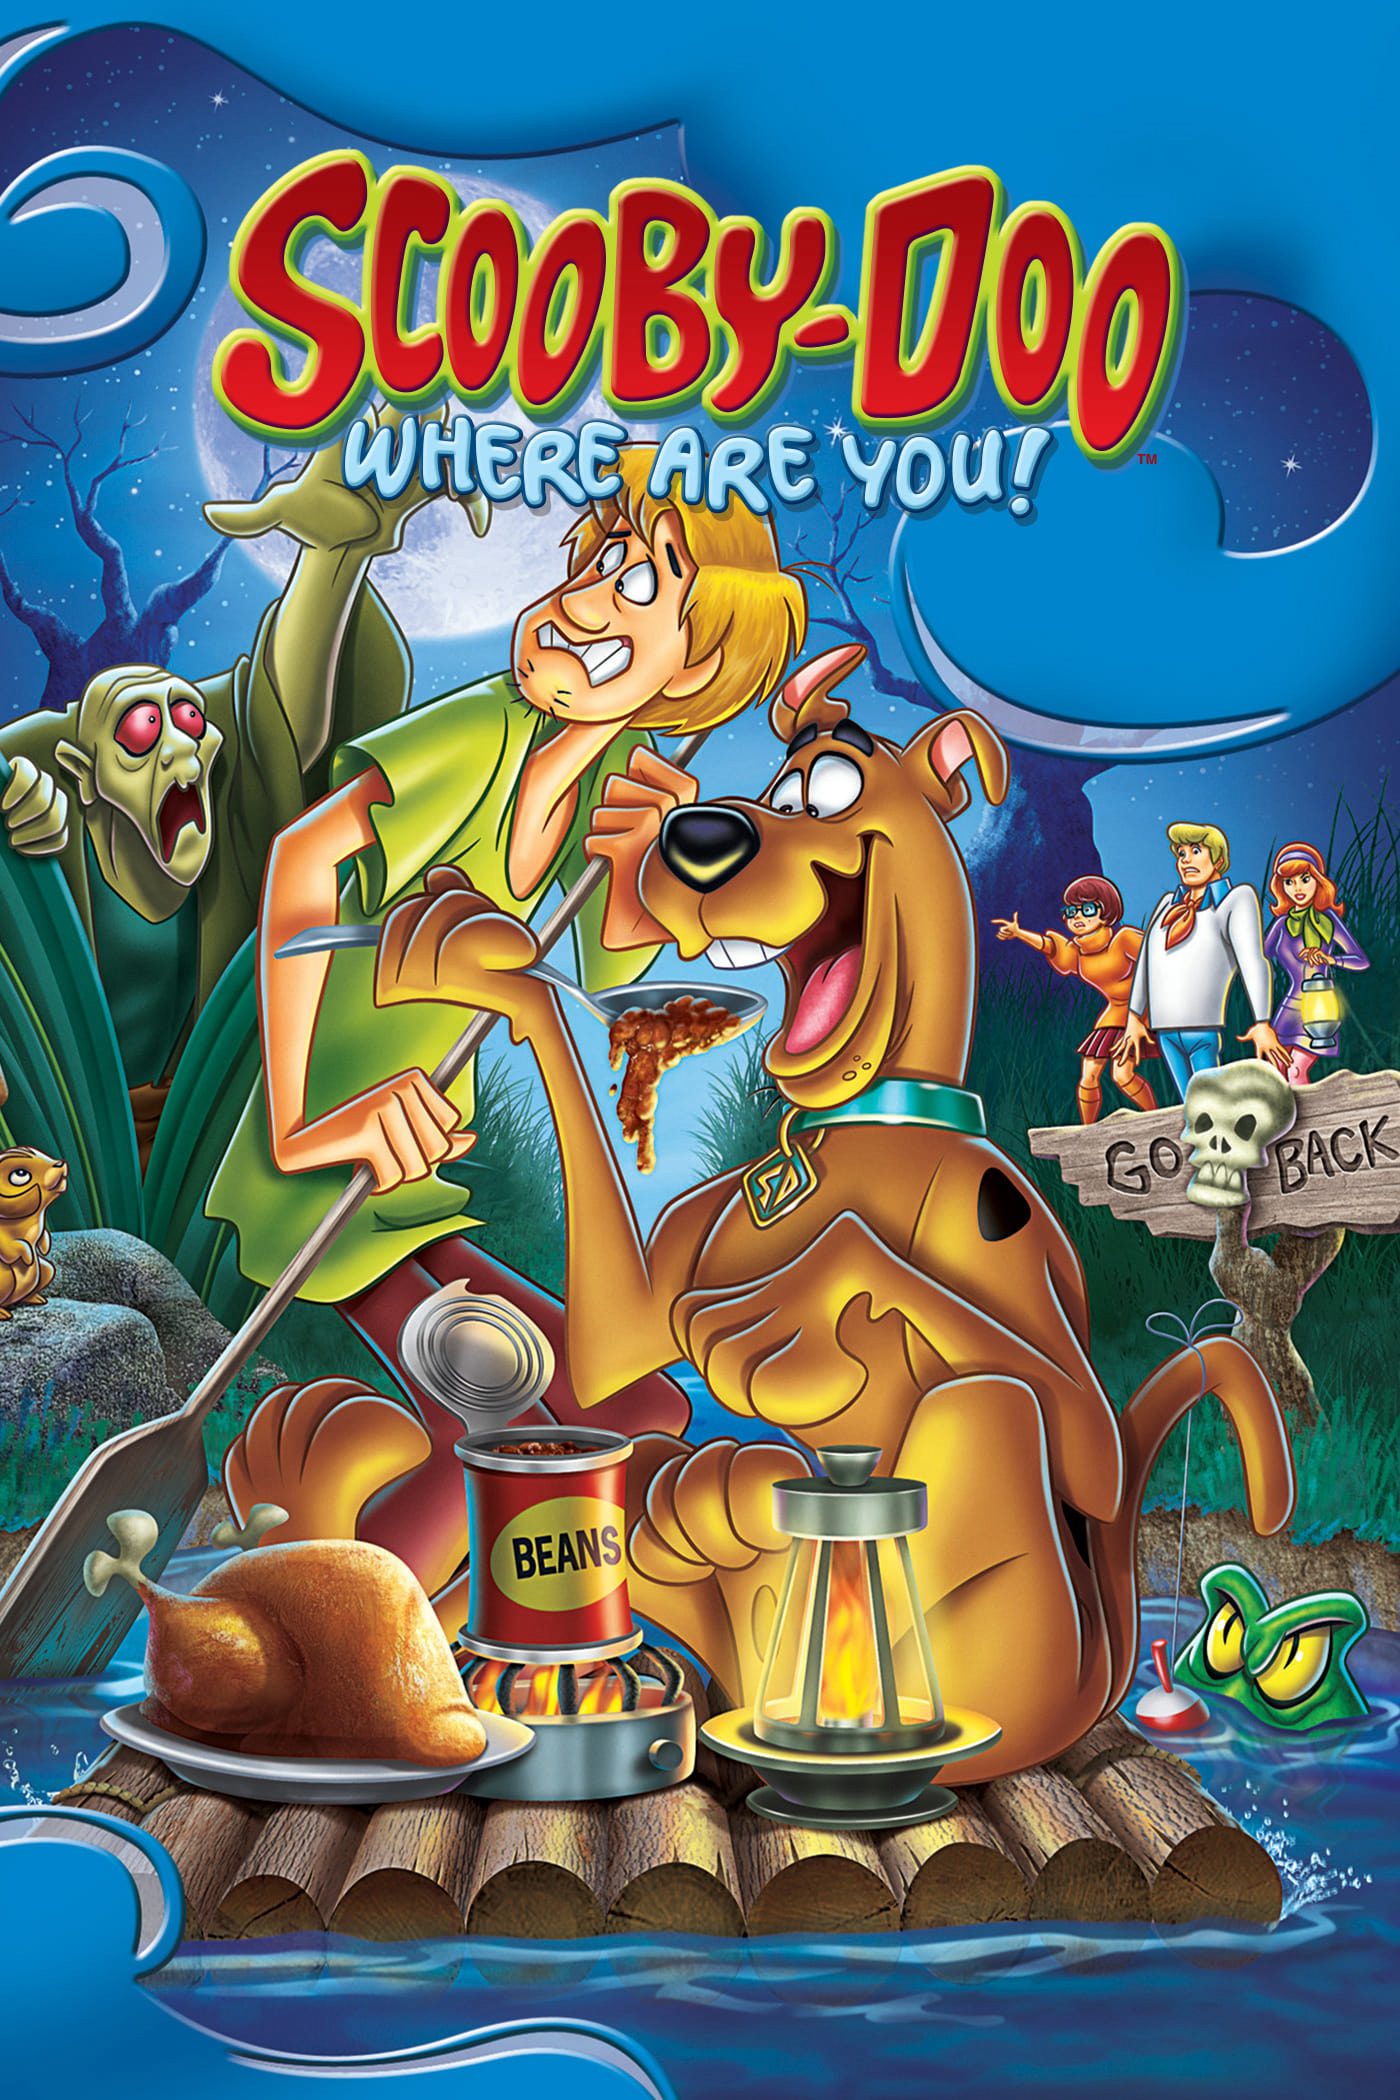 Poster Phim Scooby-Doo, Where Are You! (Phần 2) (Scooby-Doo, Where Are You! (Season 2))